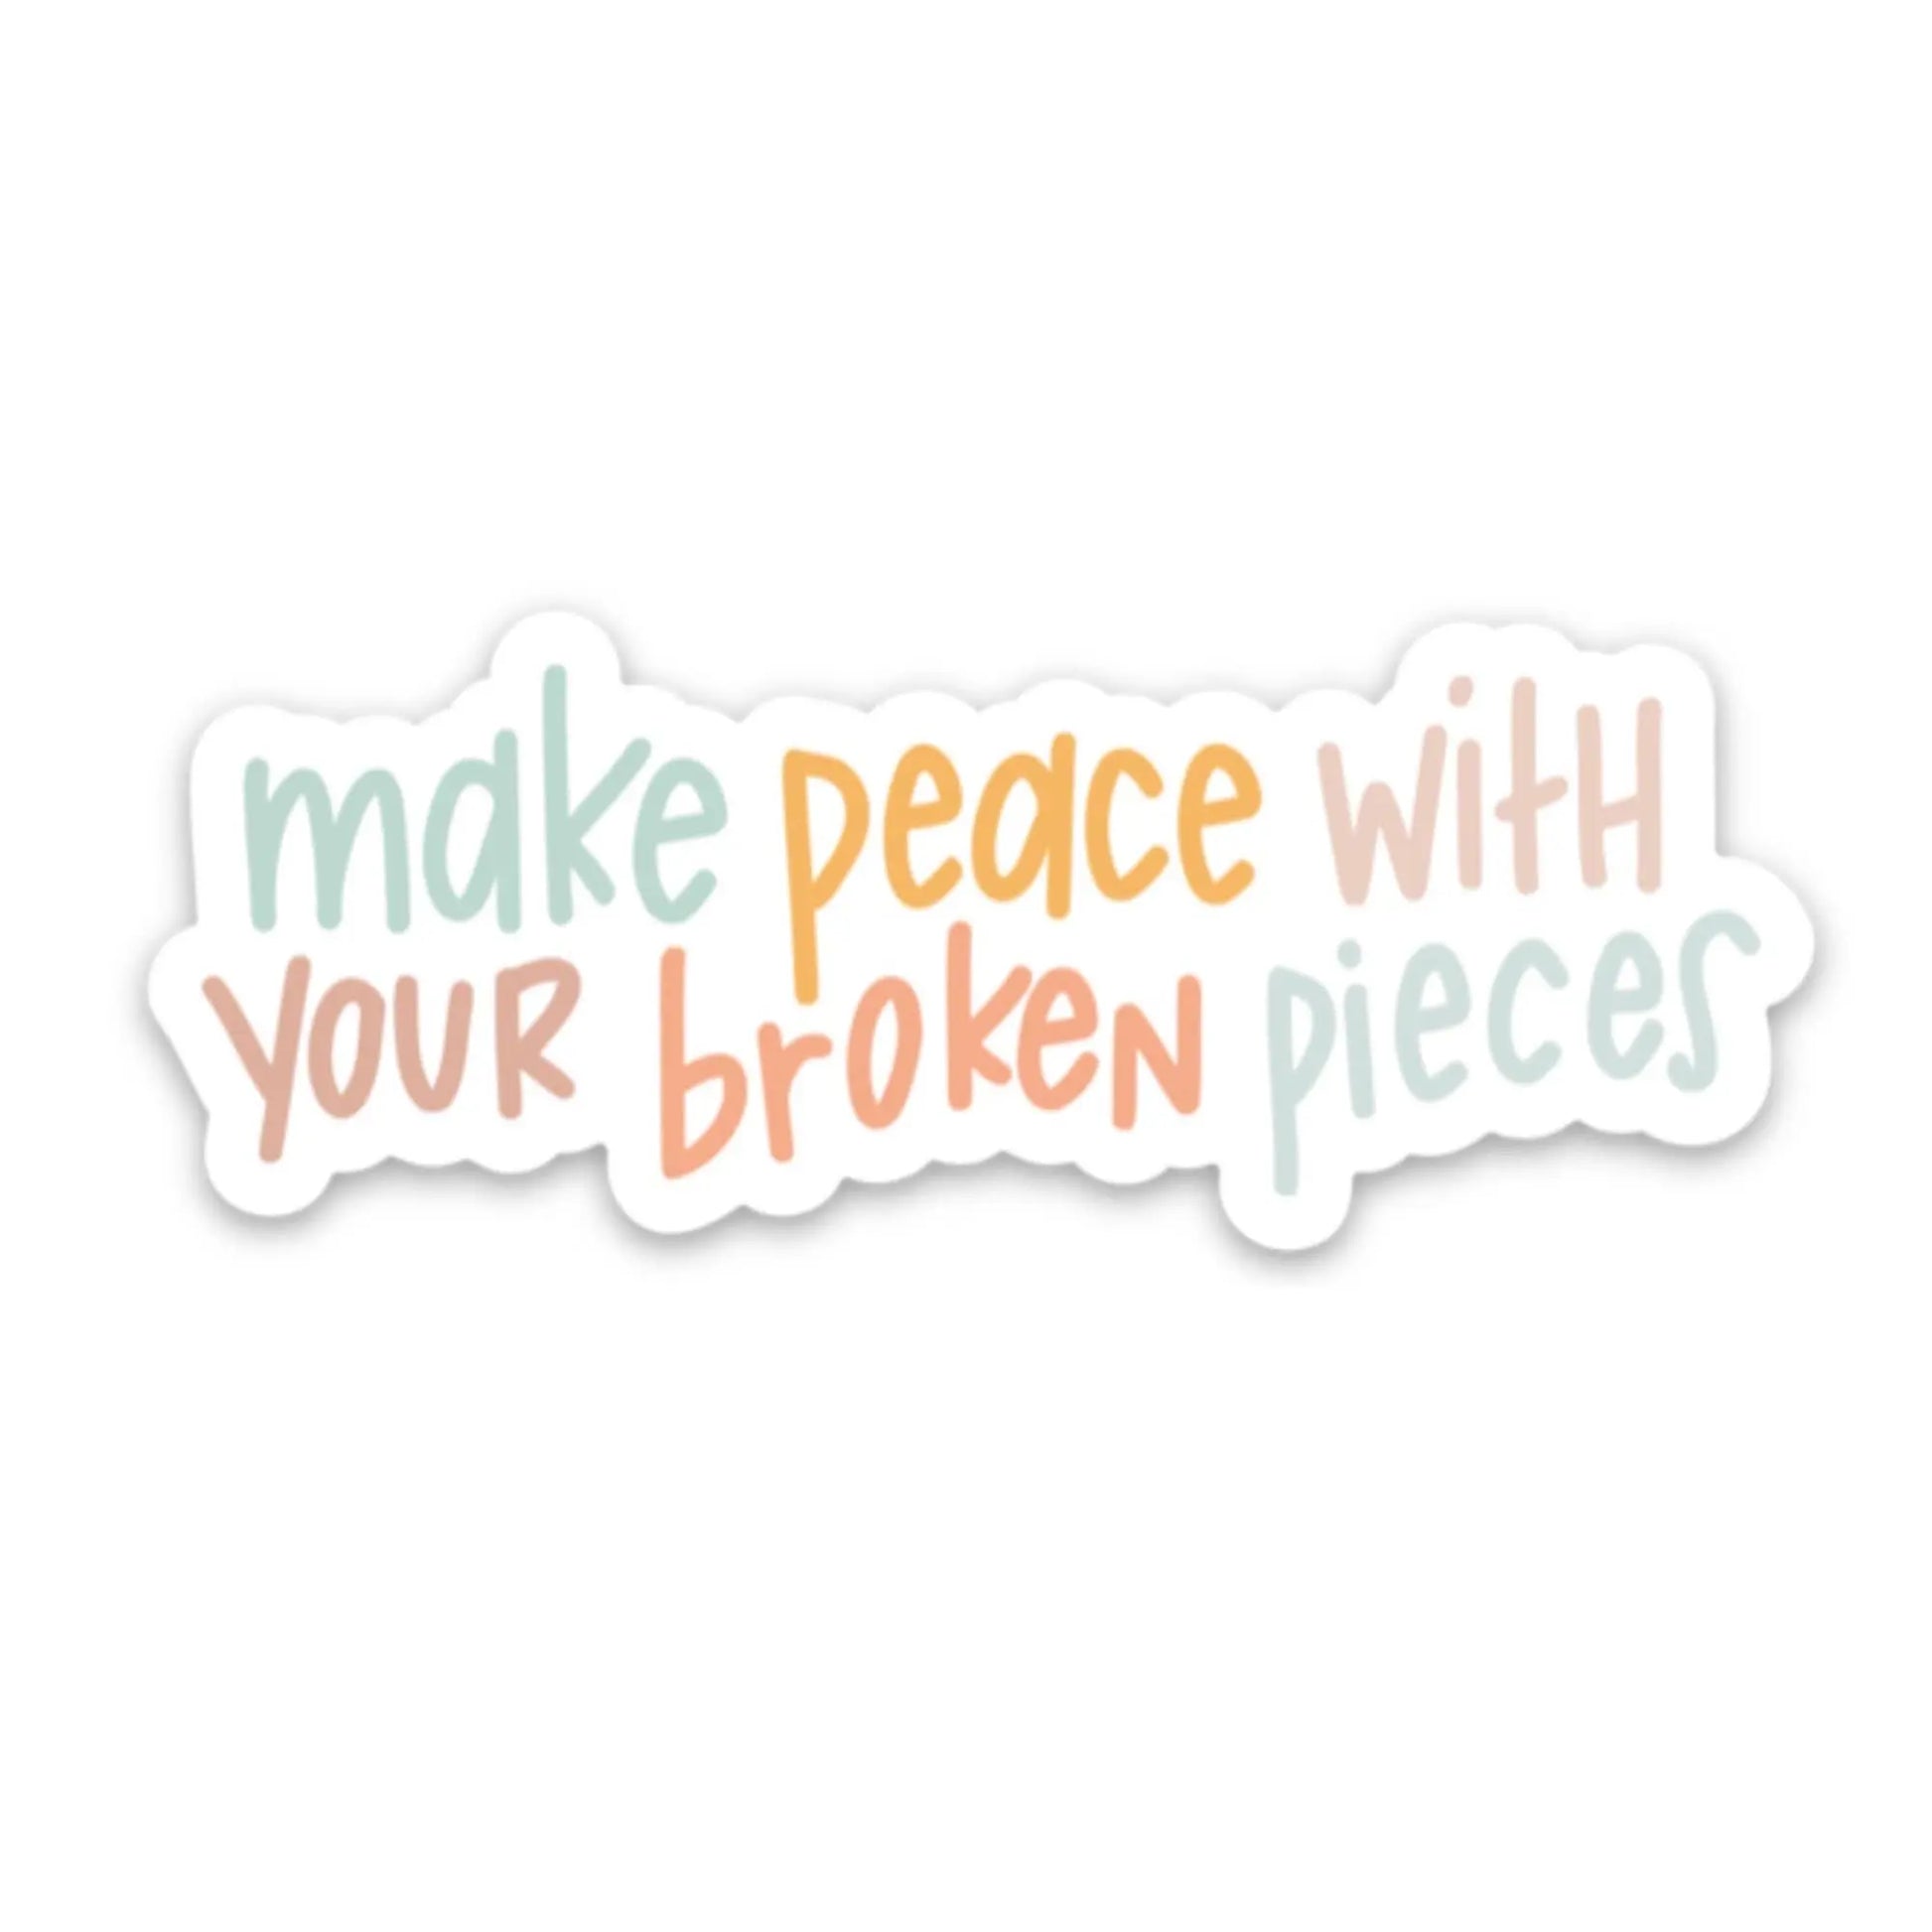 Make peace with your broken pieces | Refrigerator magnet swaygirls